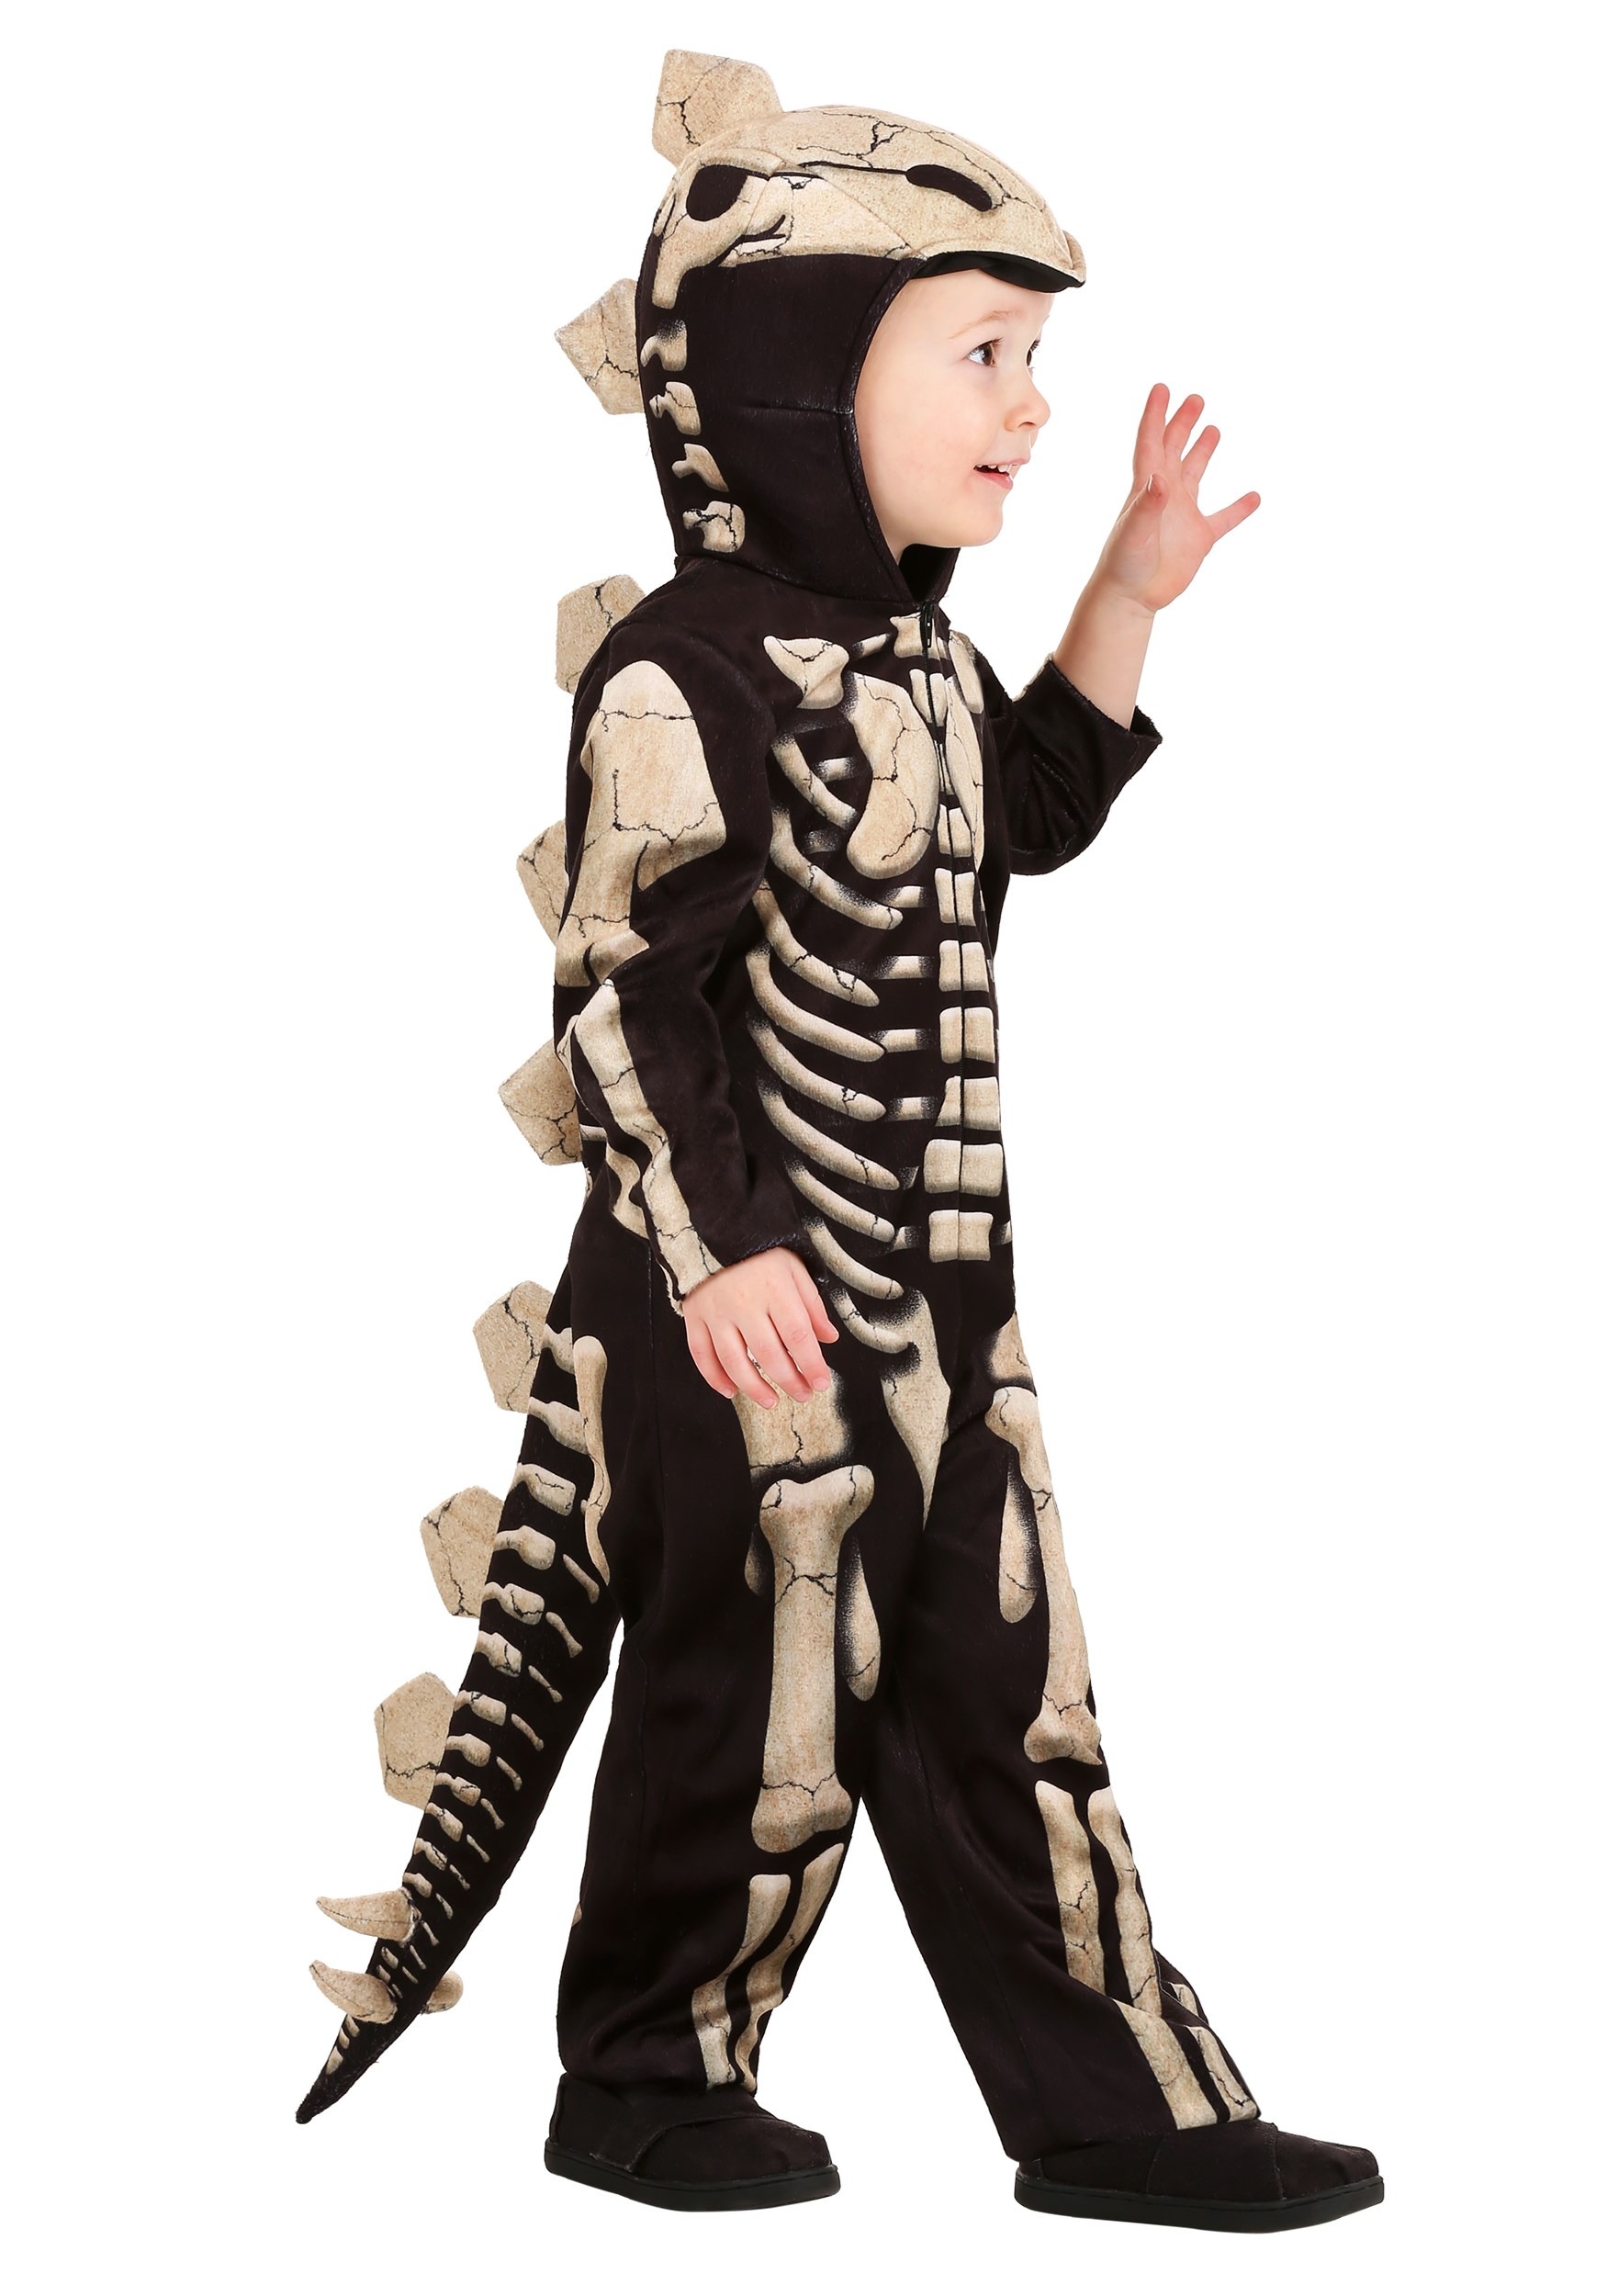 Photos - Fancy Dress FOSSIL FUN Costumes Stegosaurus  Costume for Toddlers Black/Brown FUN12 